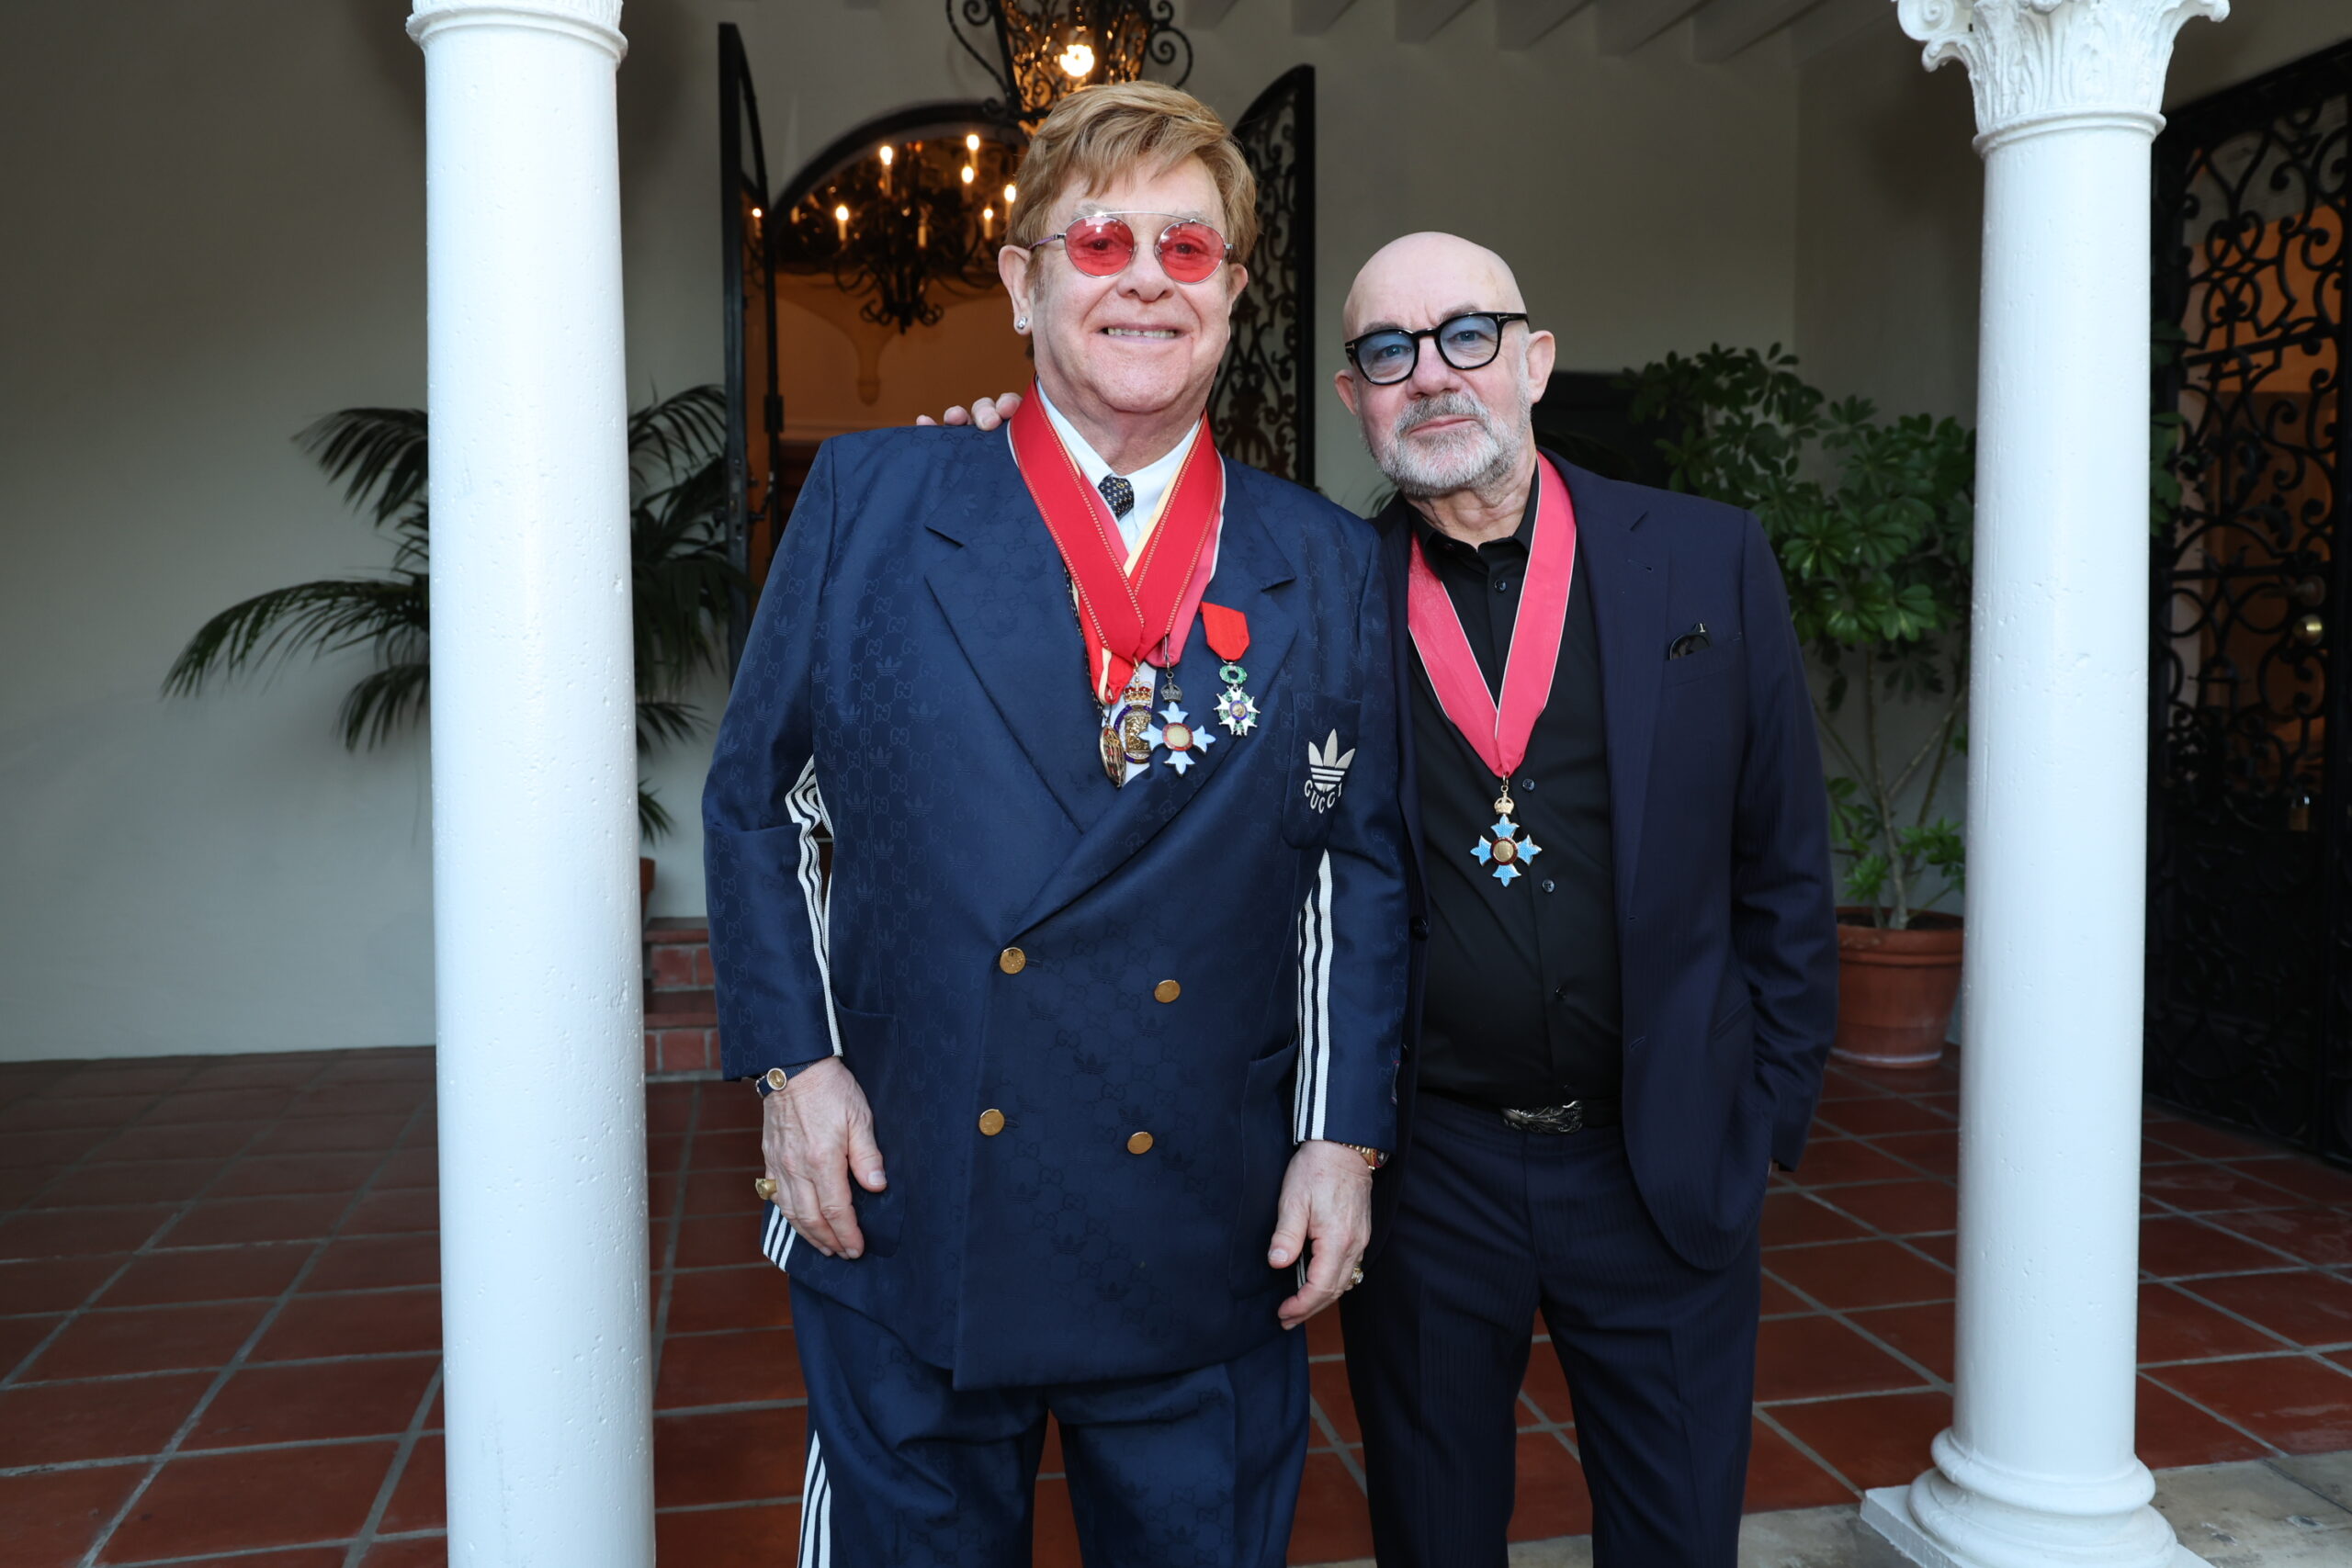 Elton John and Bernie Taupin in November 2022 (photo: Phillip Faraone / Getty Images for British Consulate-General Los Angeles)